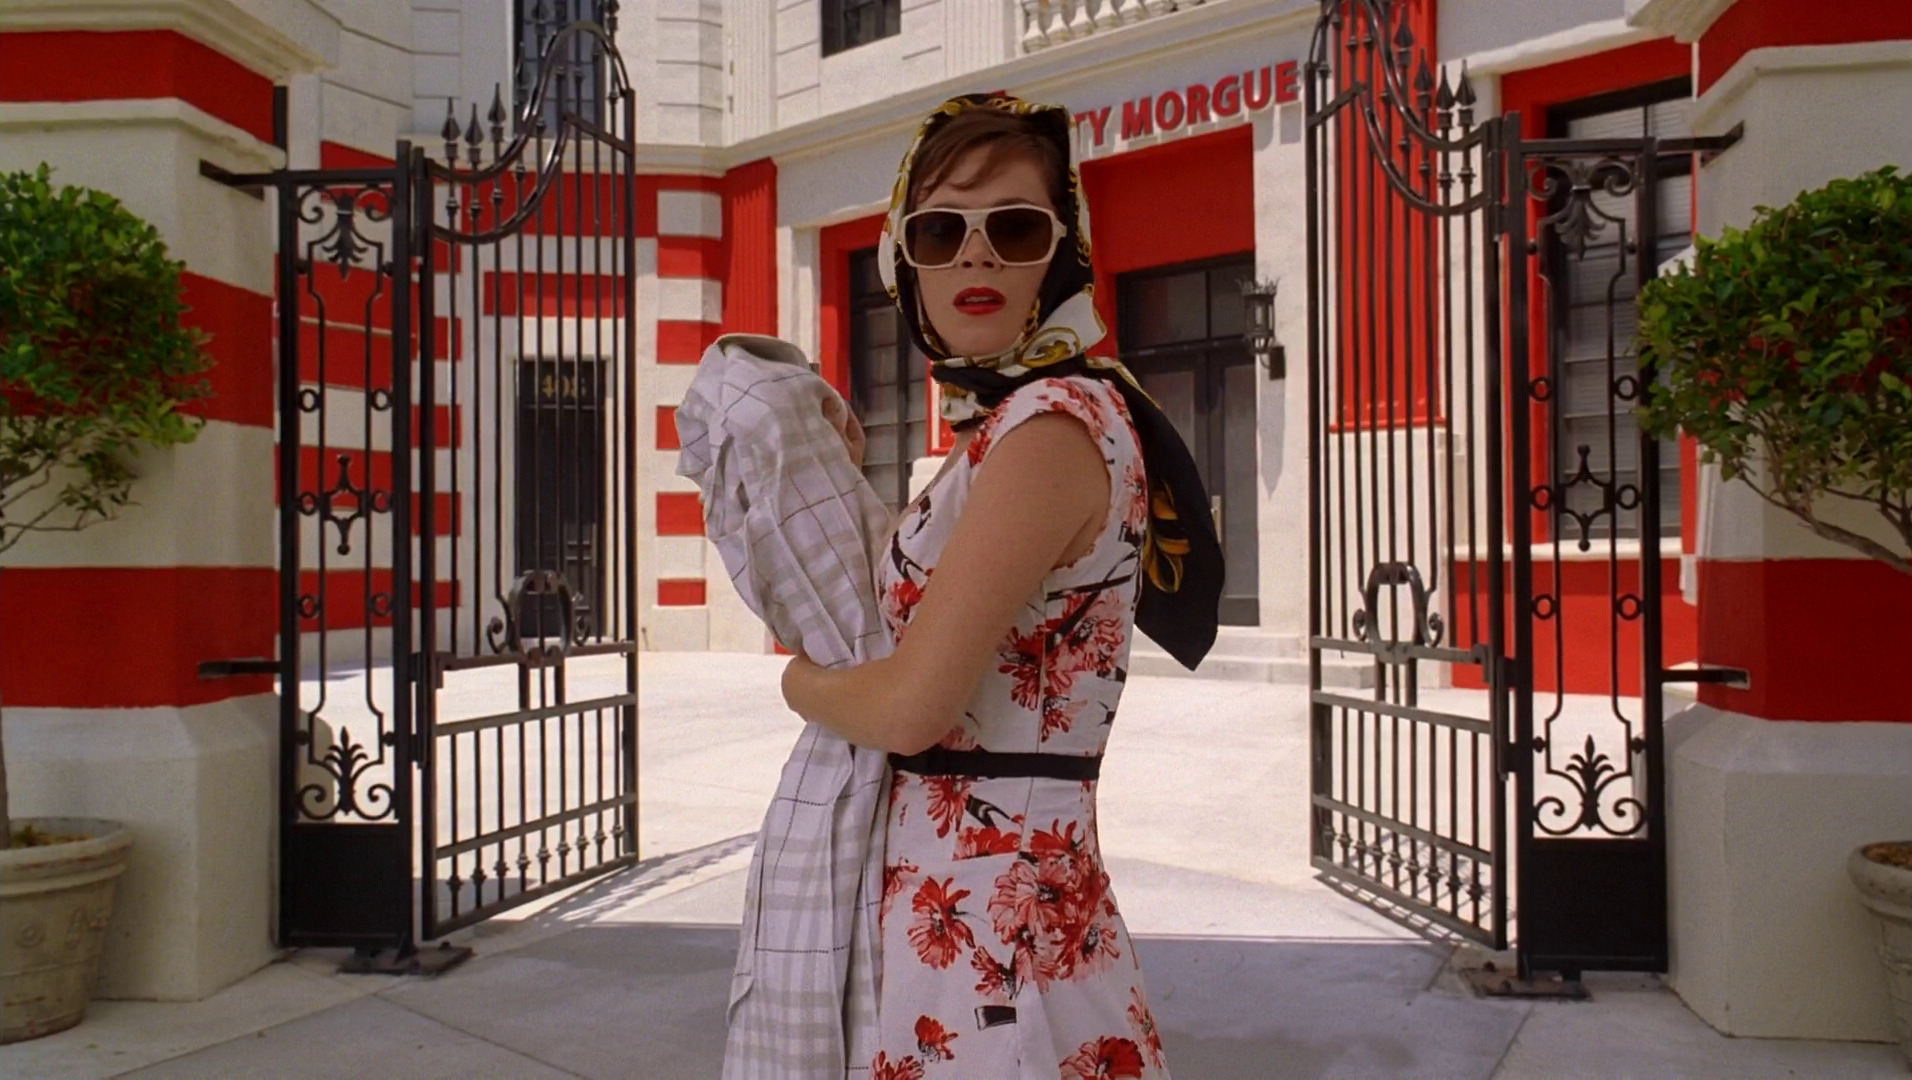 Chuck (Anna Friel) is pictured in front of a candy cane-colored morgue.

Pushing Daisies. Season 1, Episode 2: "Dummy." 2007-2009. ABC.